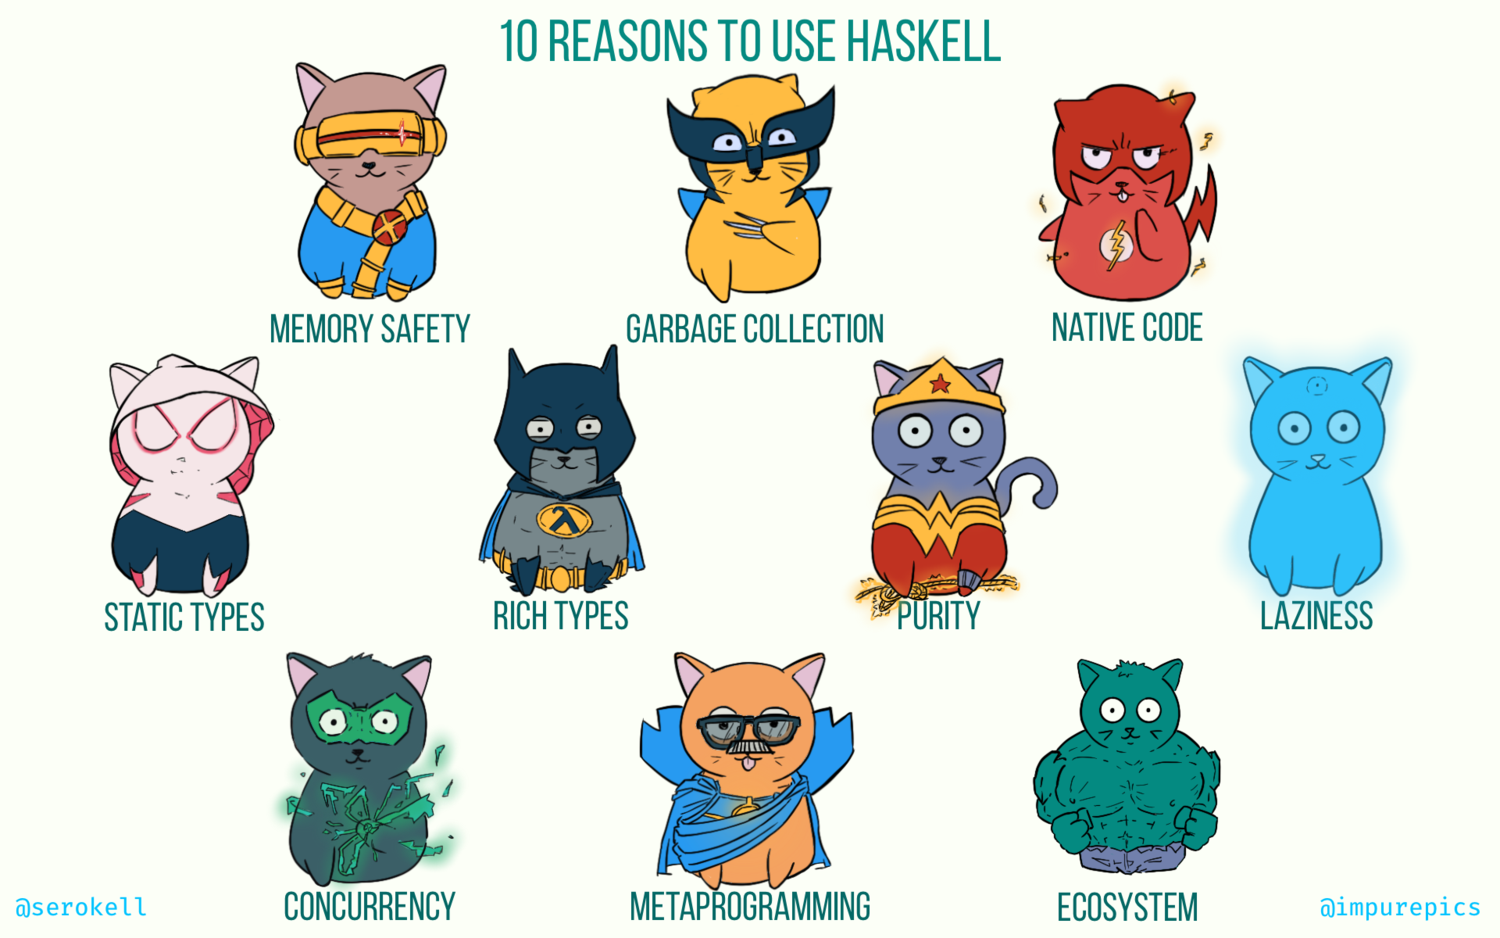 10 Reasons to Use Haskell